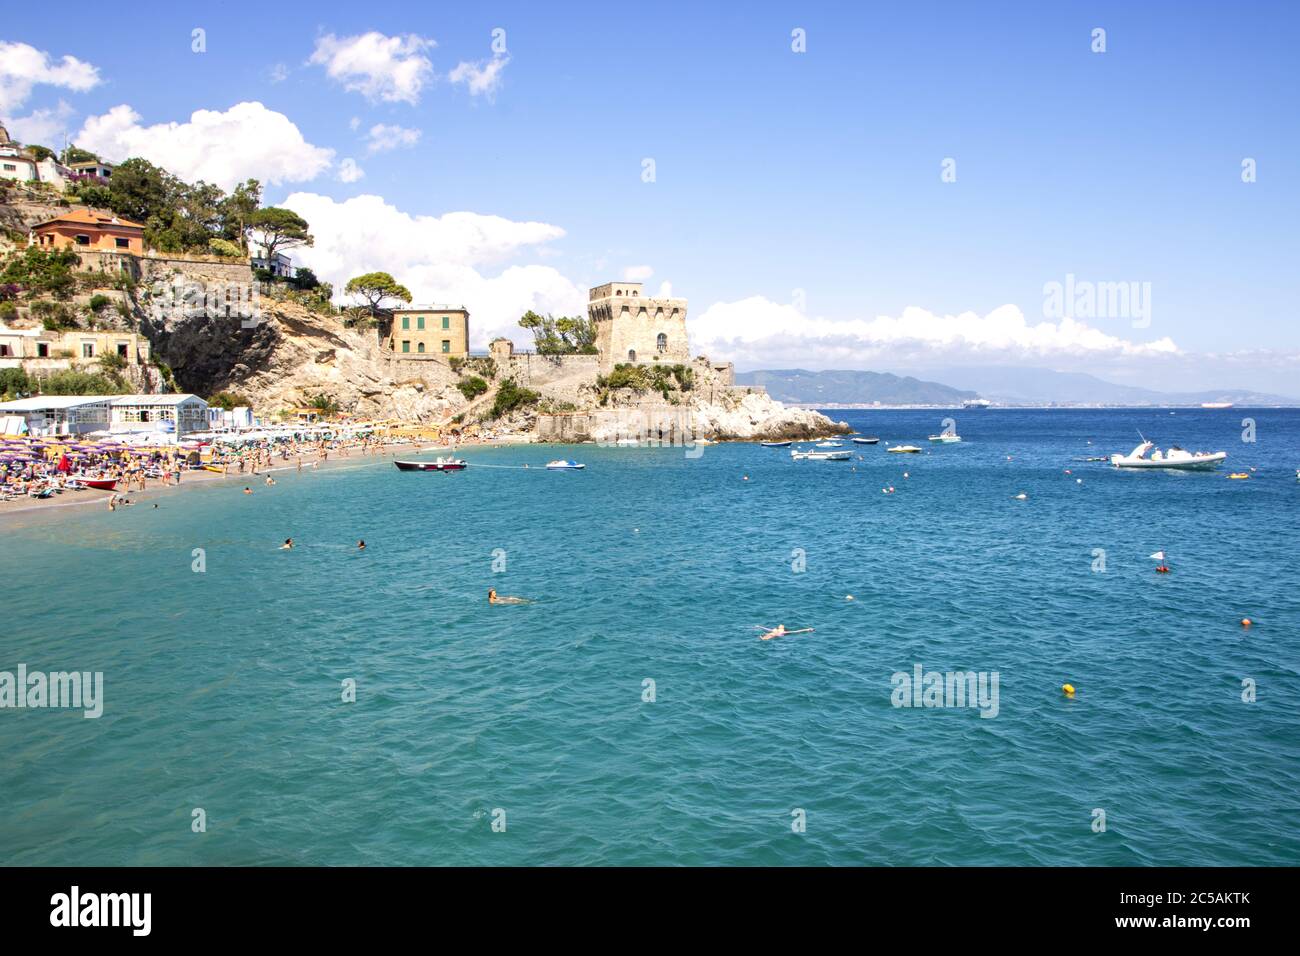 At Erchie - Italy - On june 2020 - Bay and beach of Erchie on Amalfi coast, Italy Stock Photo